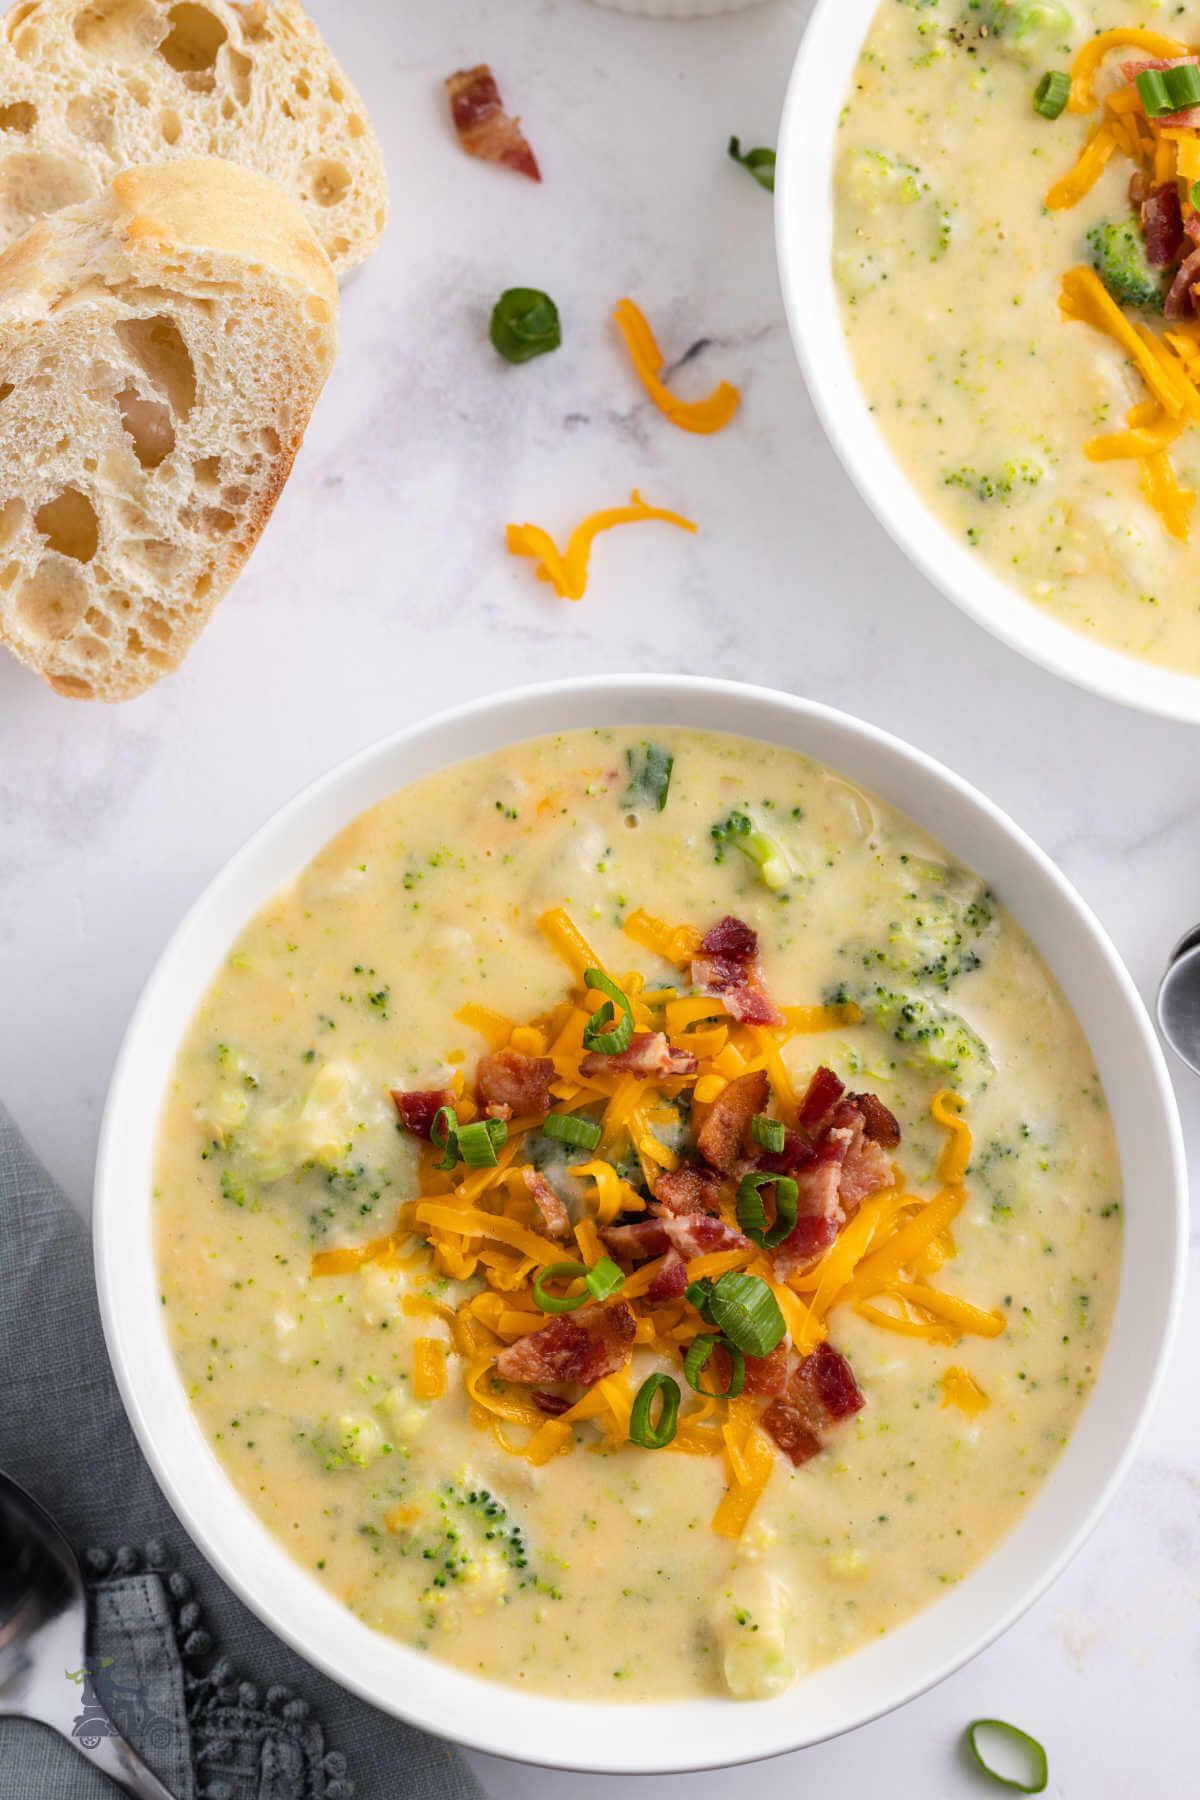 Overhead view of two bowls of broccoli potato soup garnished with cheddar cheese, bacon bits, and green onion. 